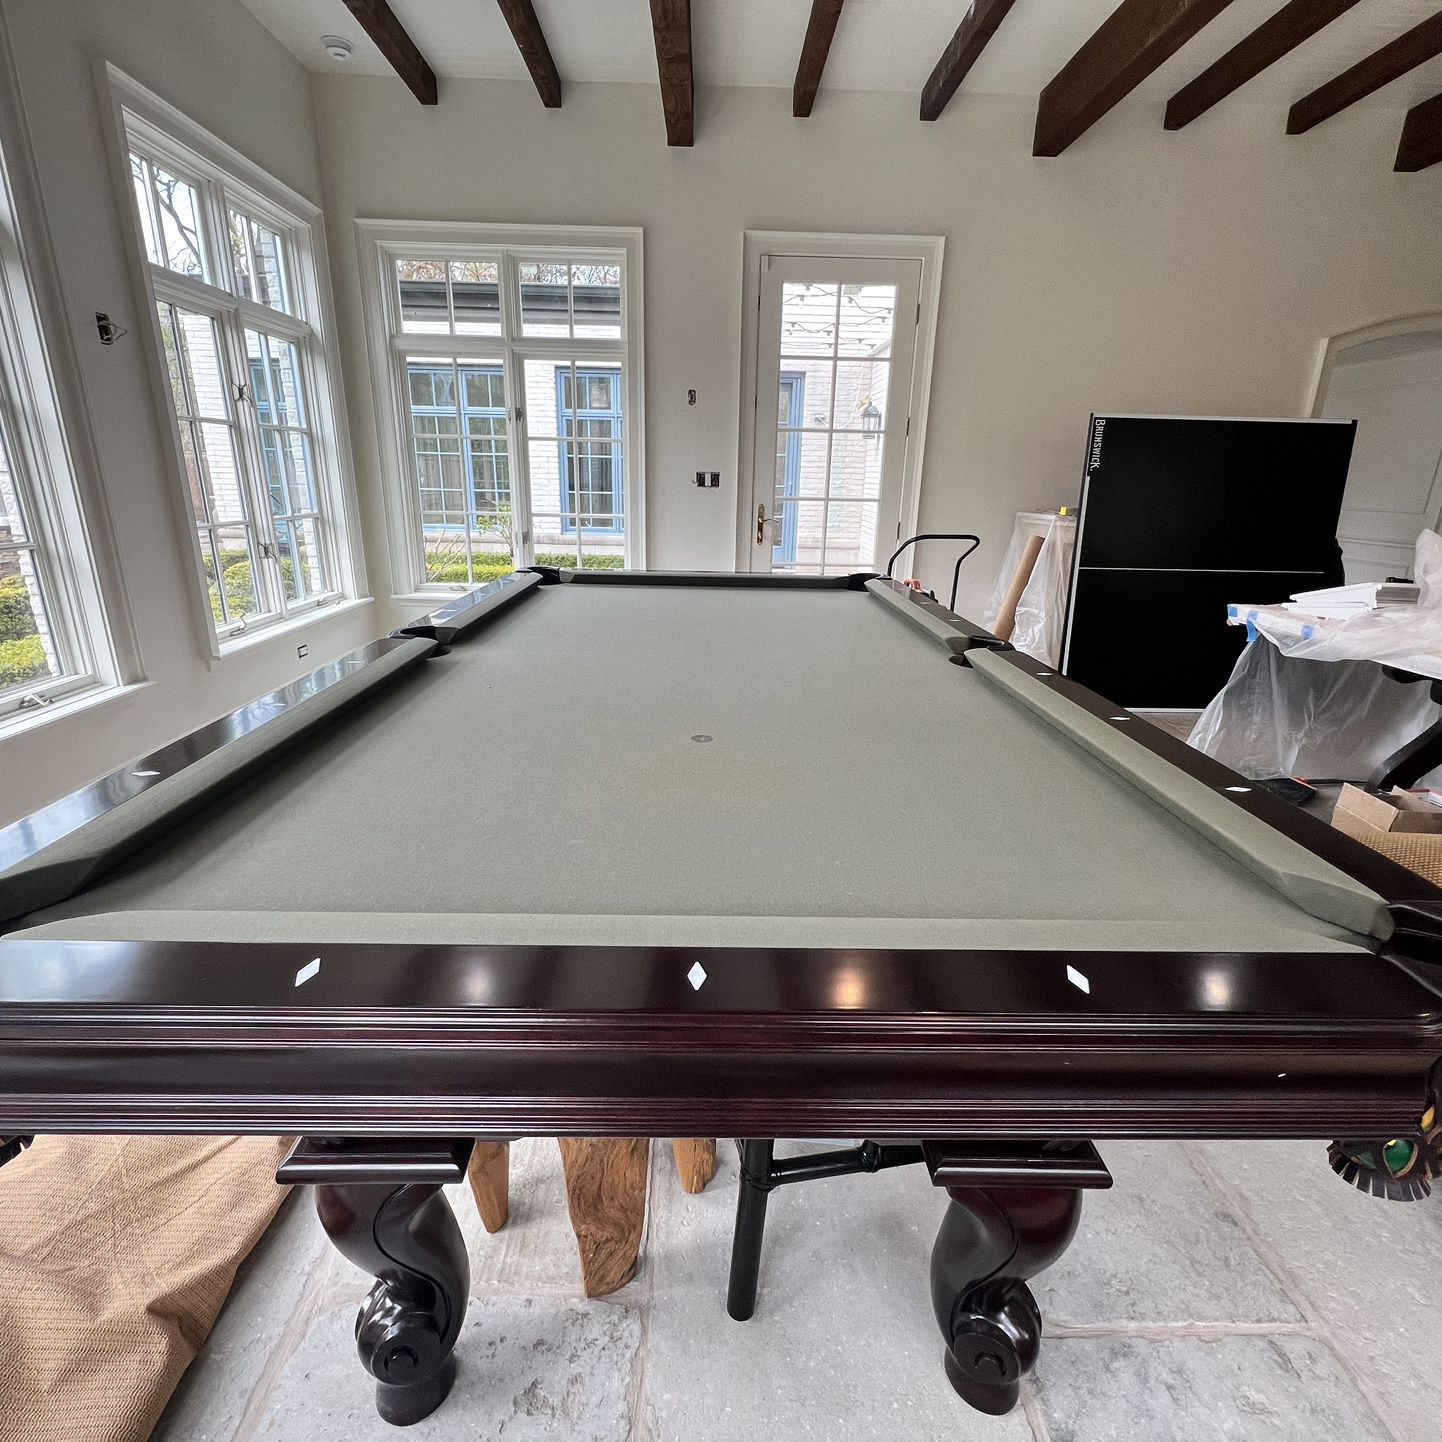 BRUNSWICK pool Table For Sale